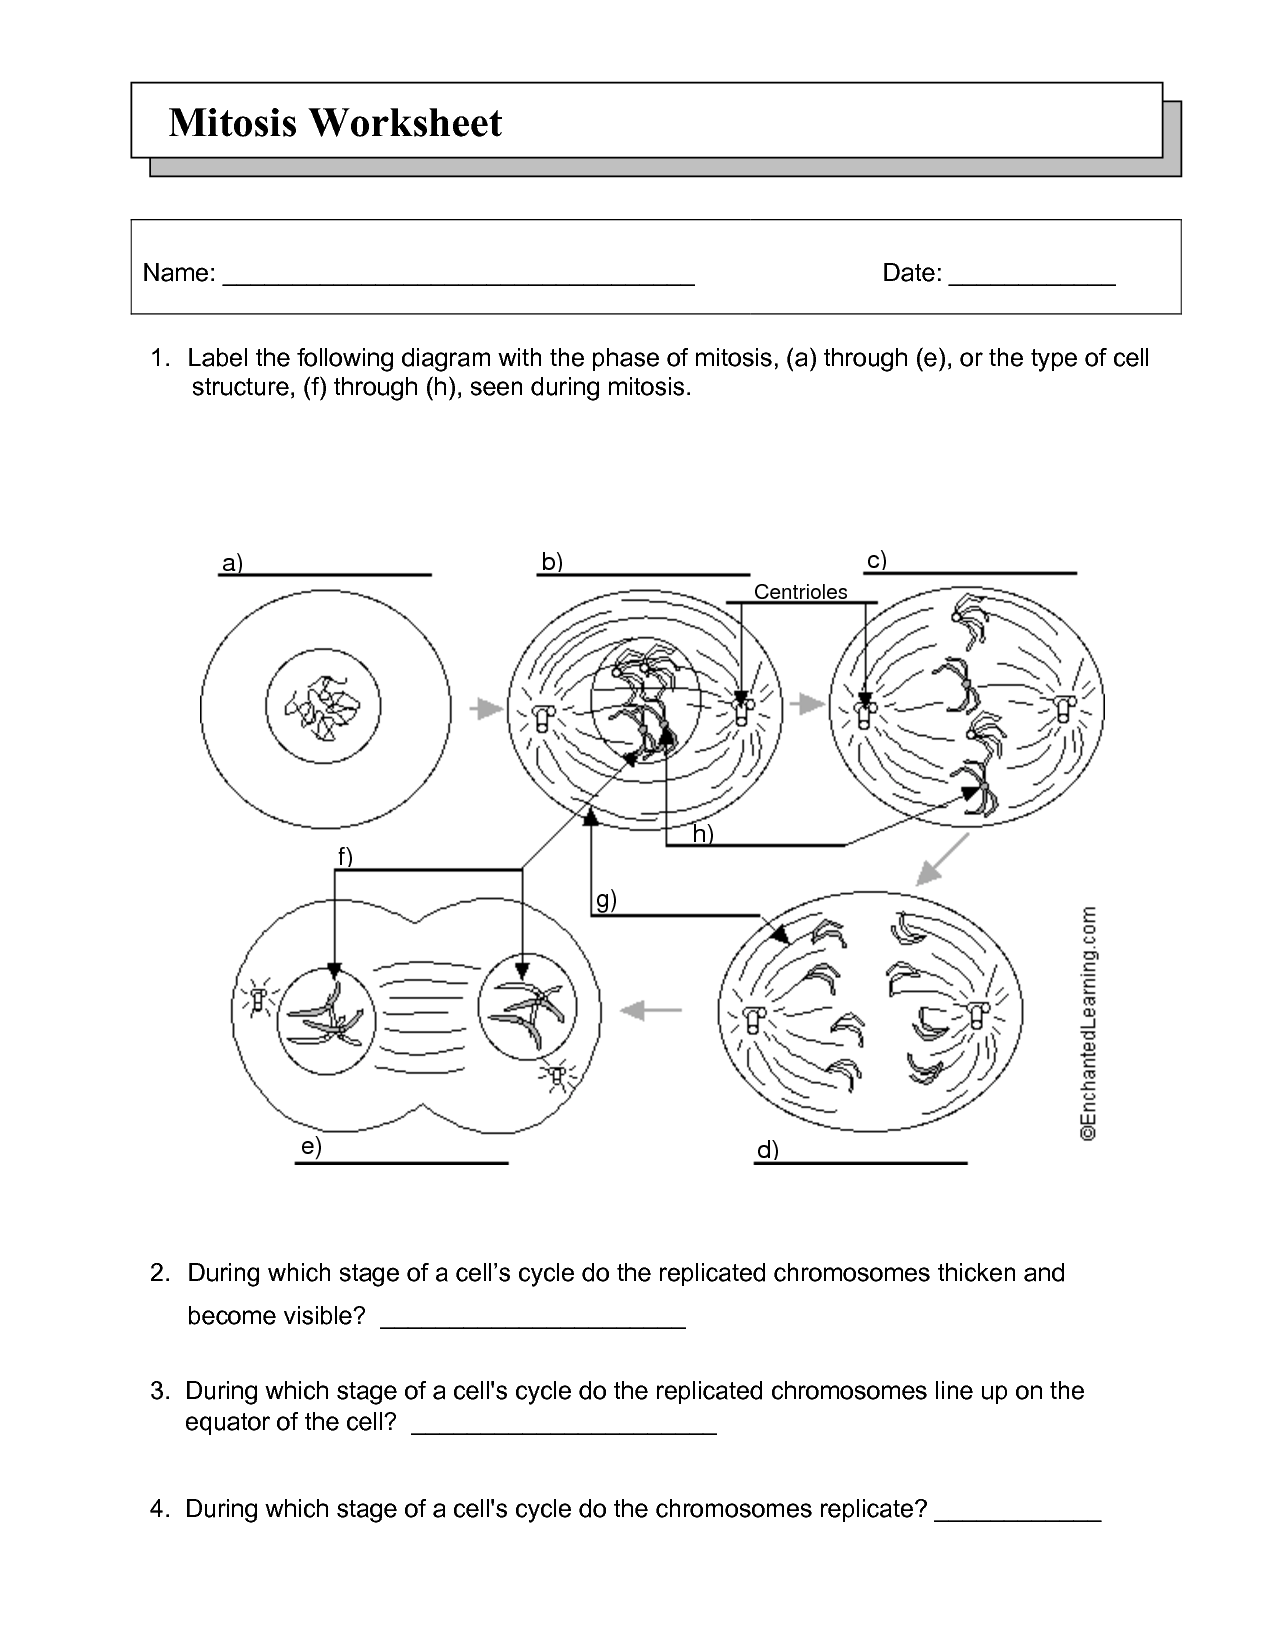 The Cell Cycle Coloring Worksheet Answers - Colouring page that